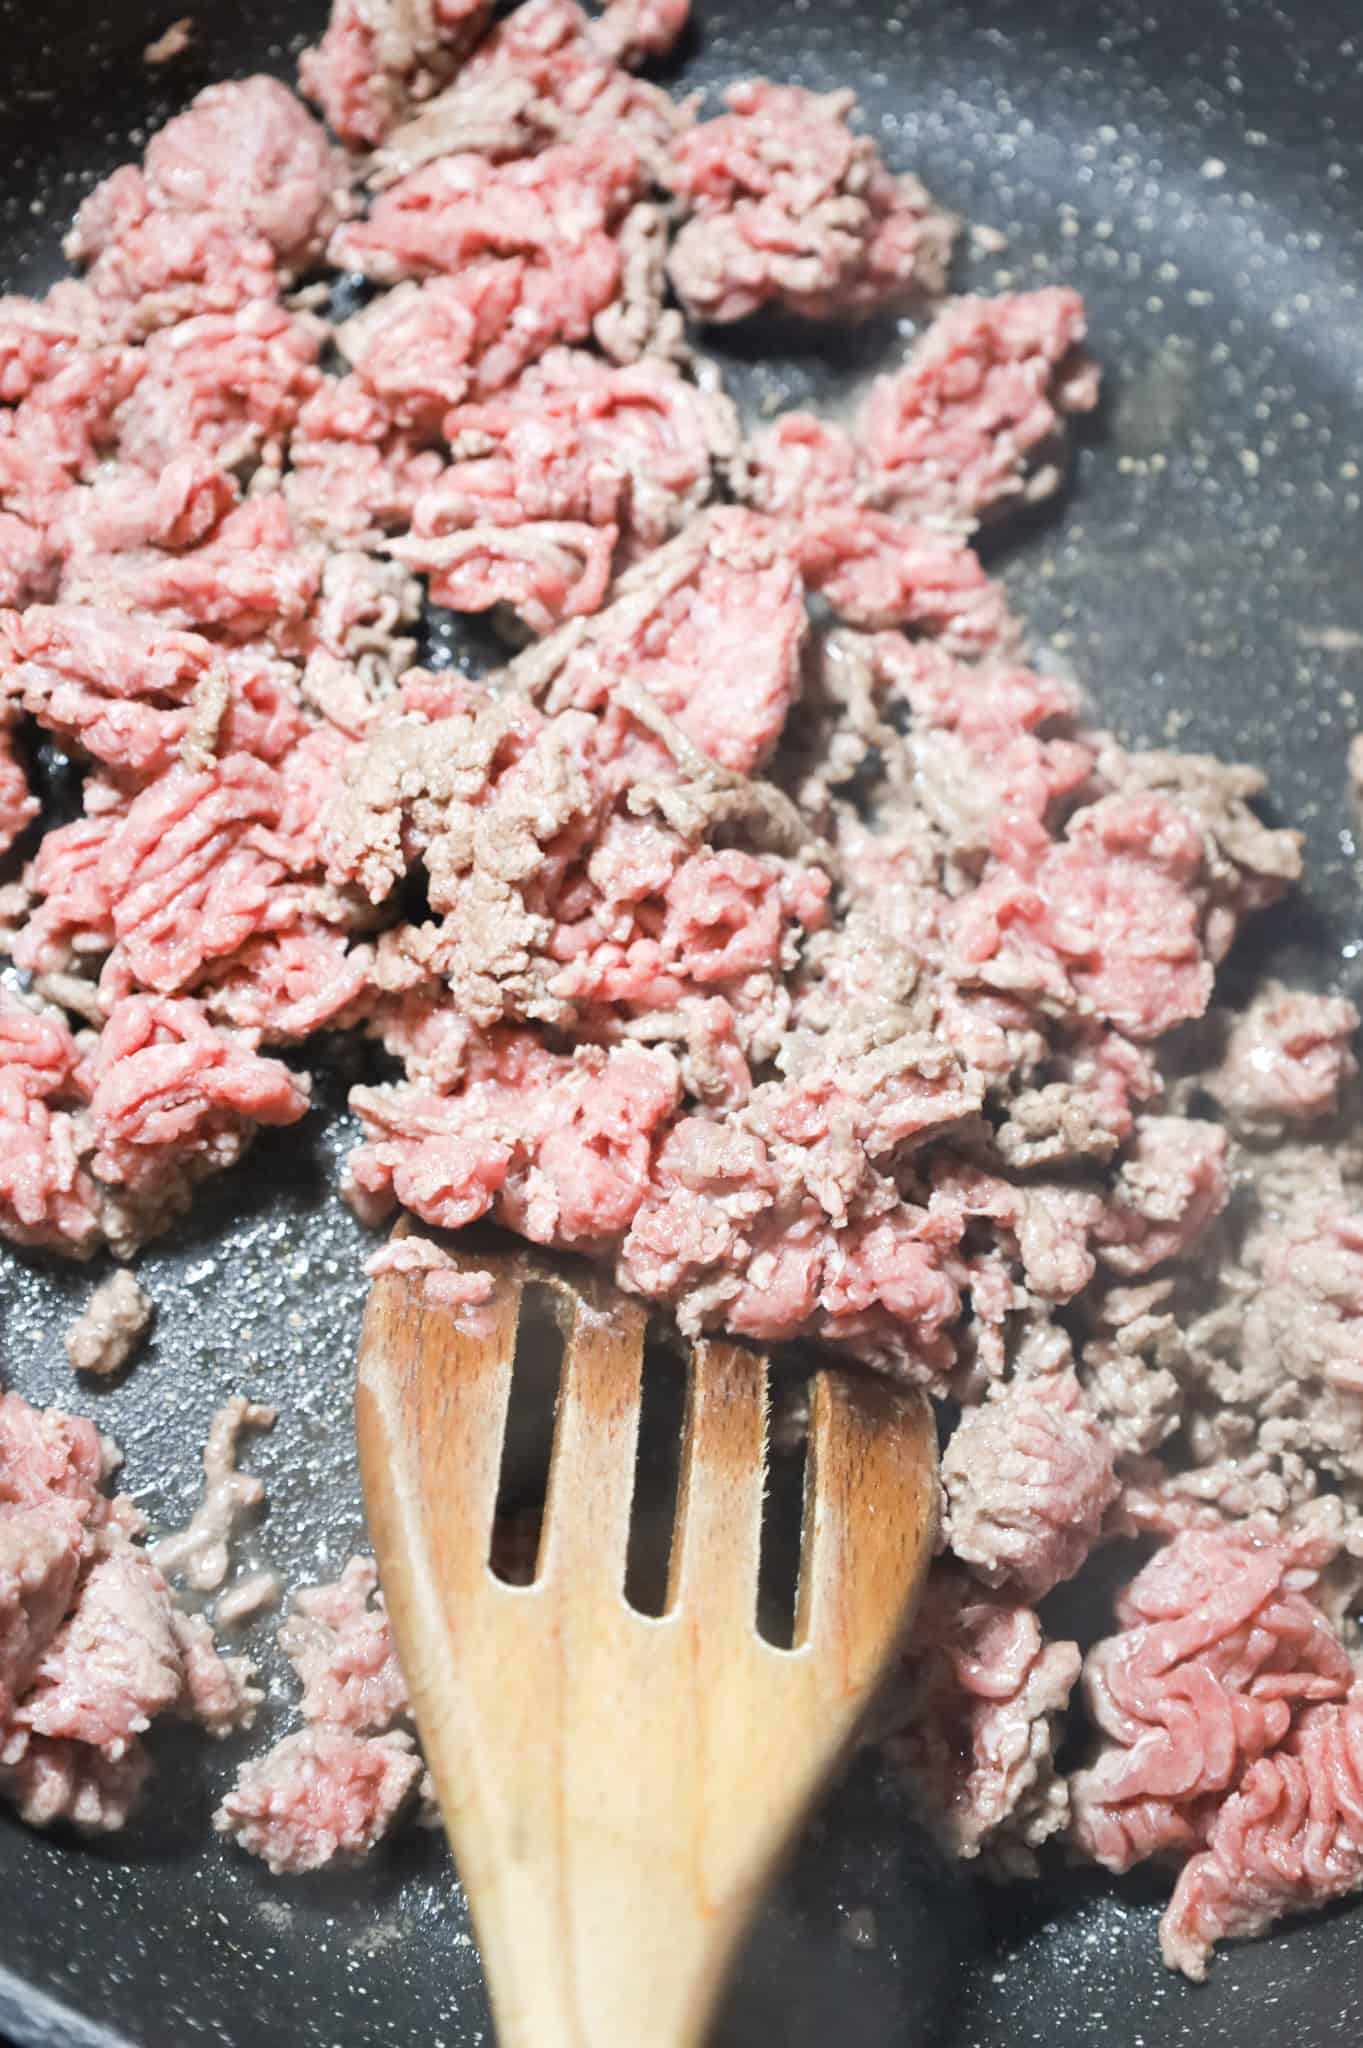 lean ground beef being cooked in a skillet